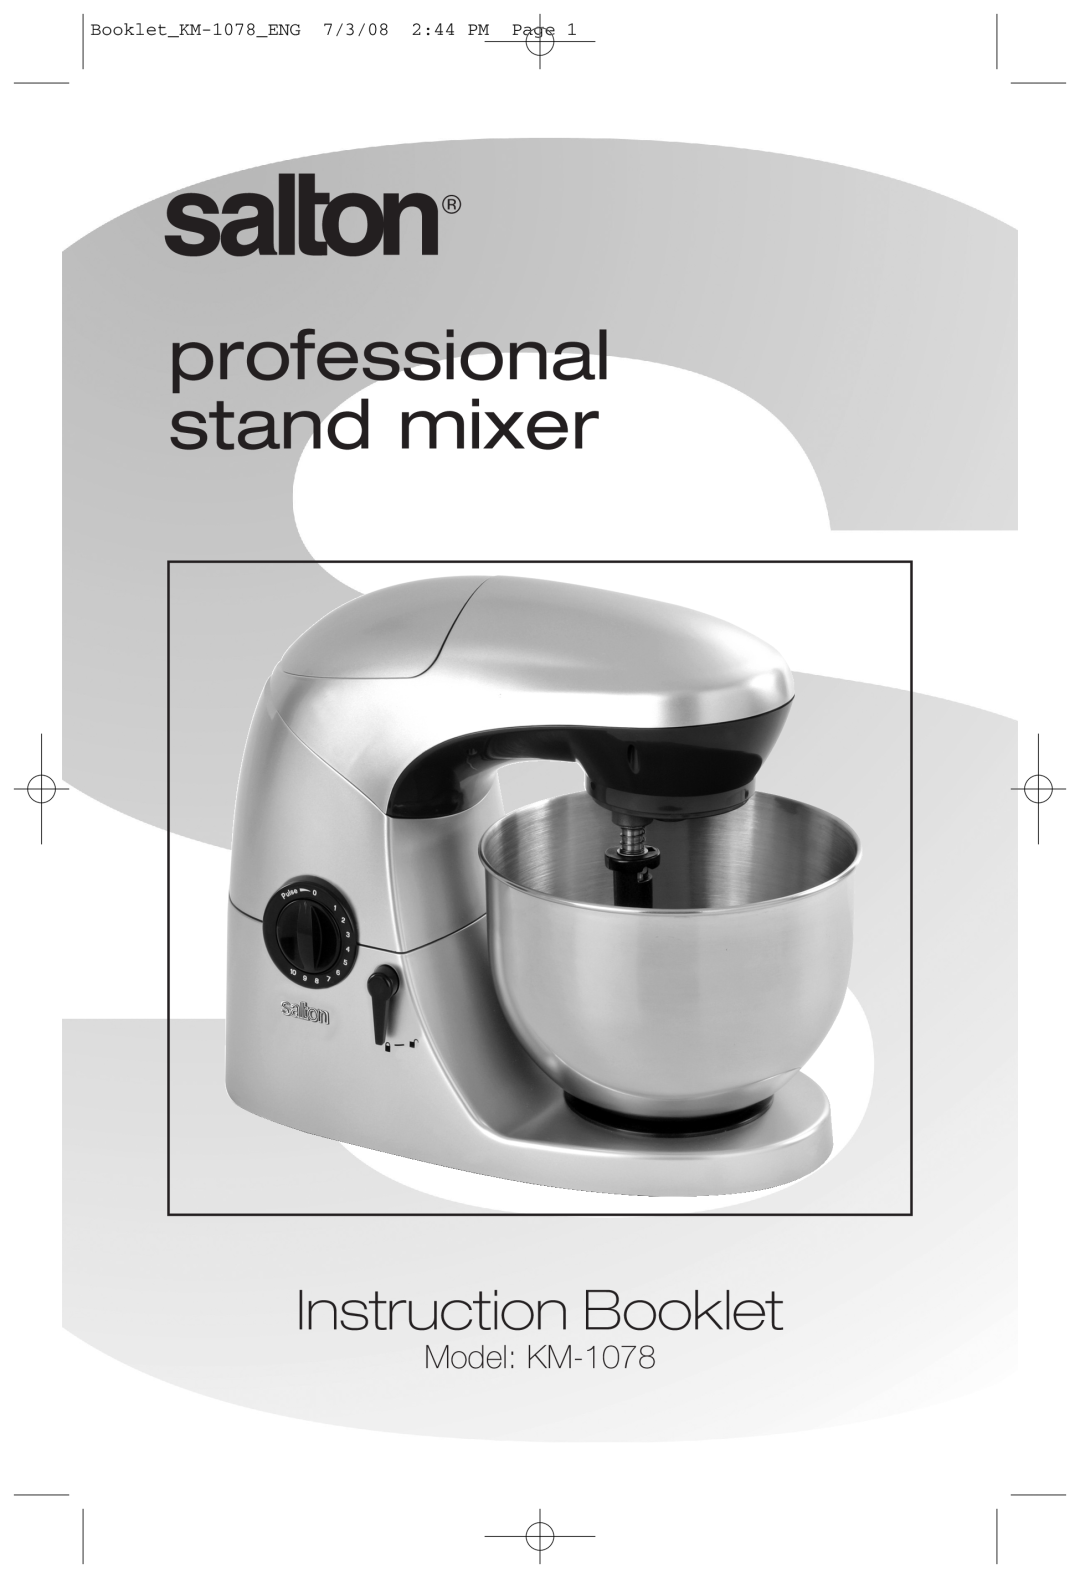 Salton manual professional stand mixer, Instruction Booklet, Model KM-1078, Booklet KM-1078 ENG7/3/08 2 44 PM Page 